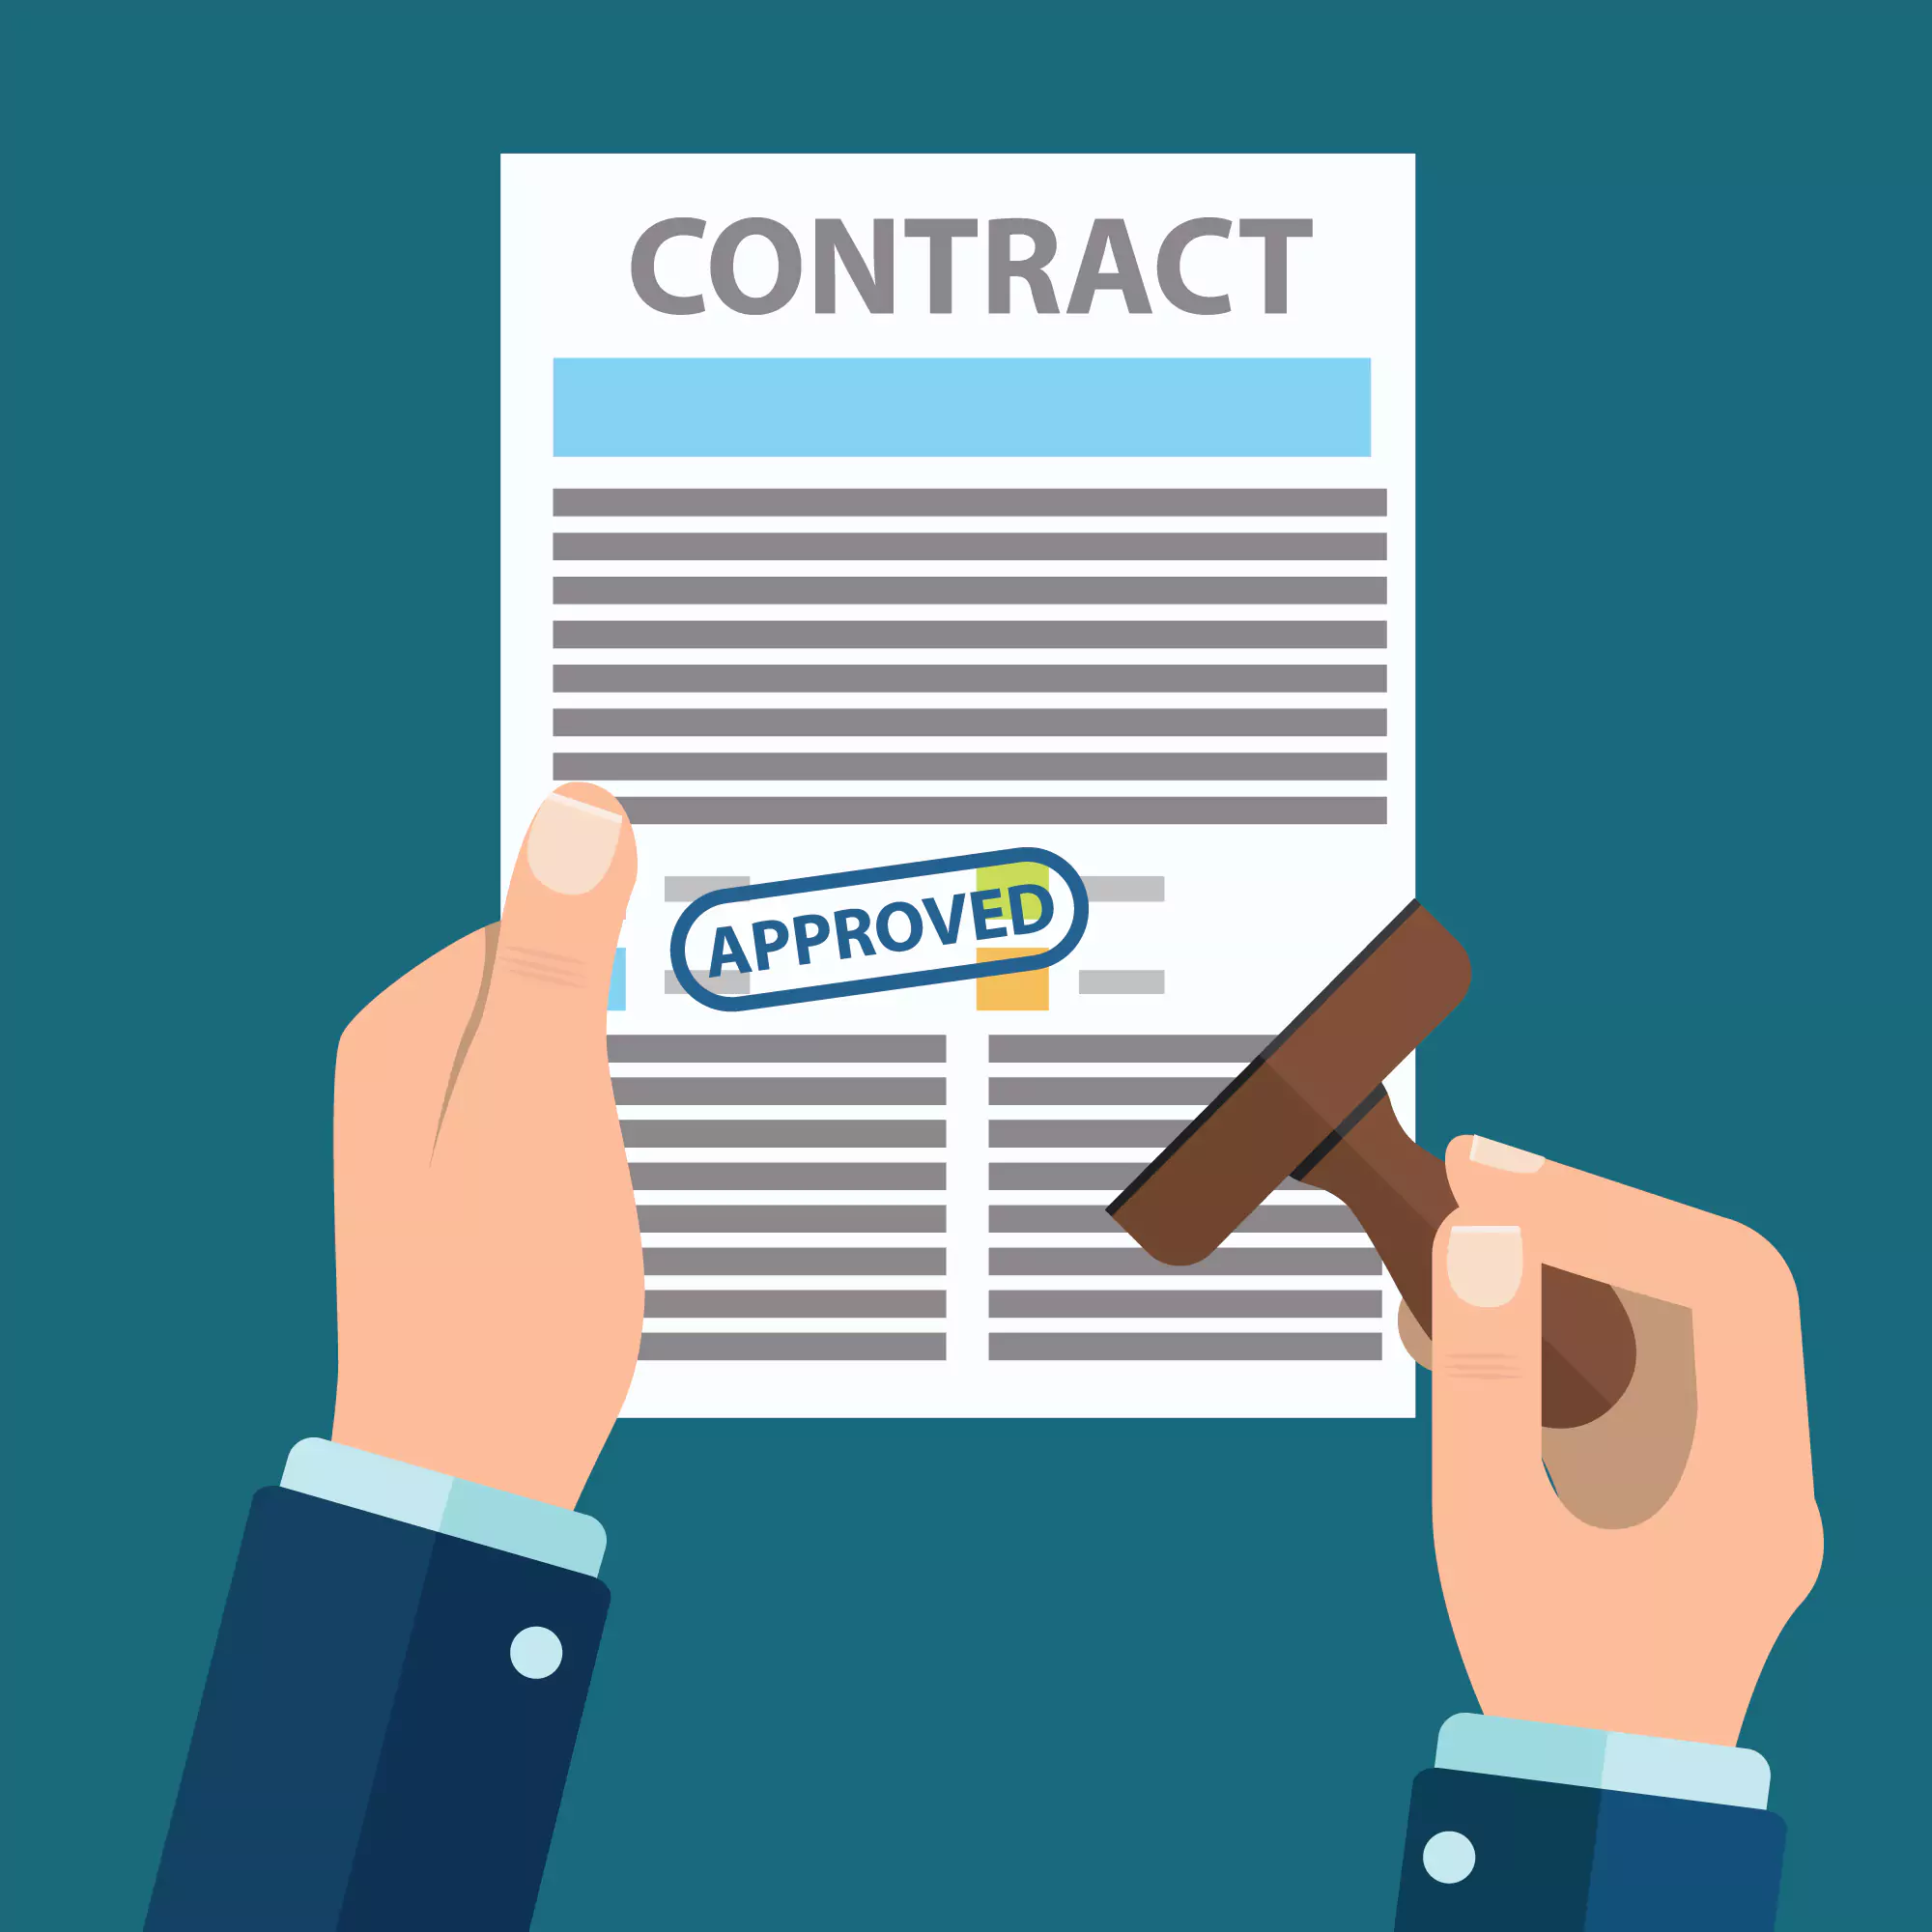 a Time and Materials (TM) contract is an agreement between a client and a development team